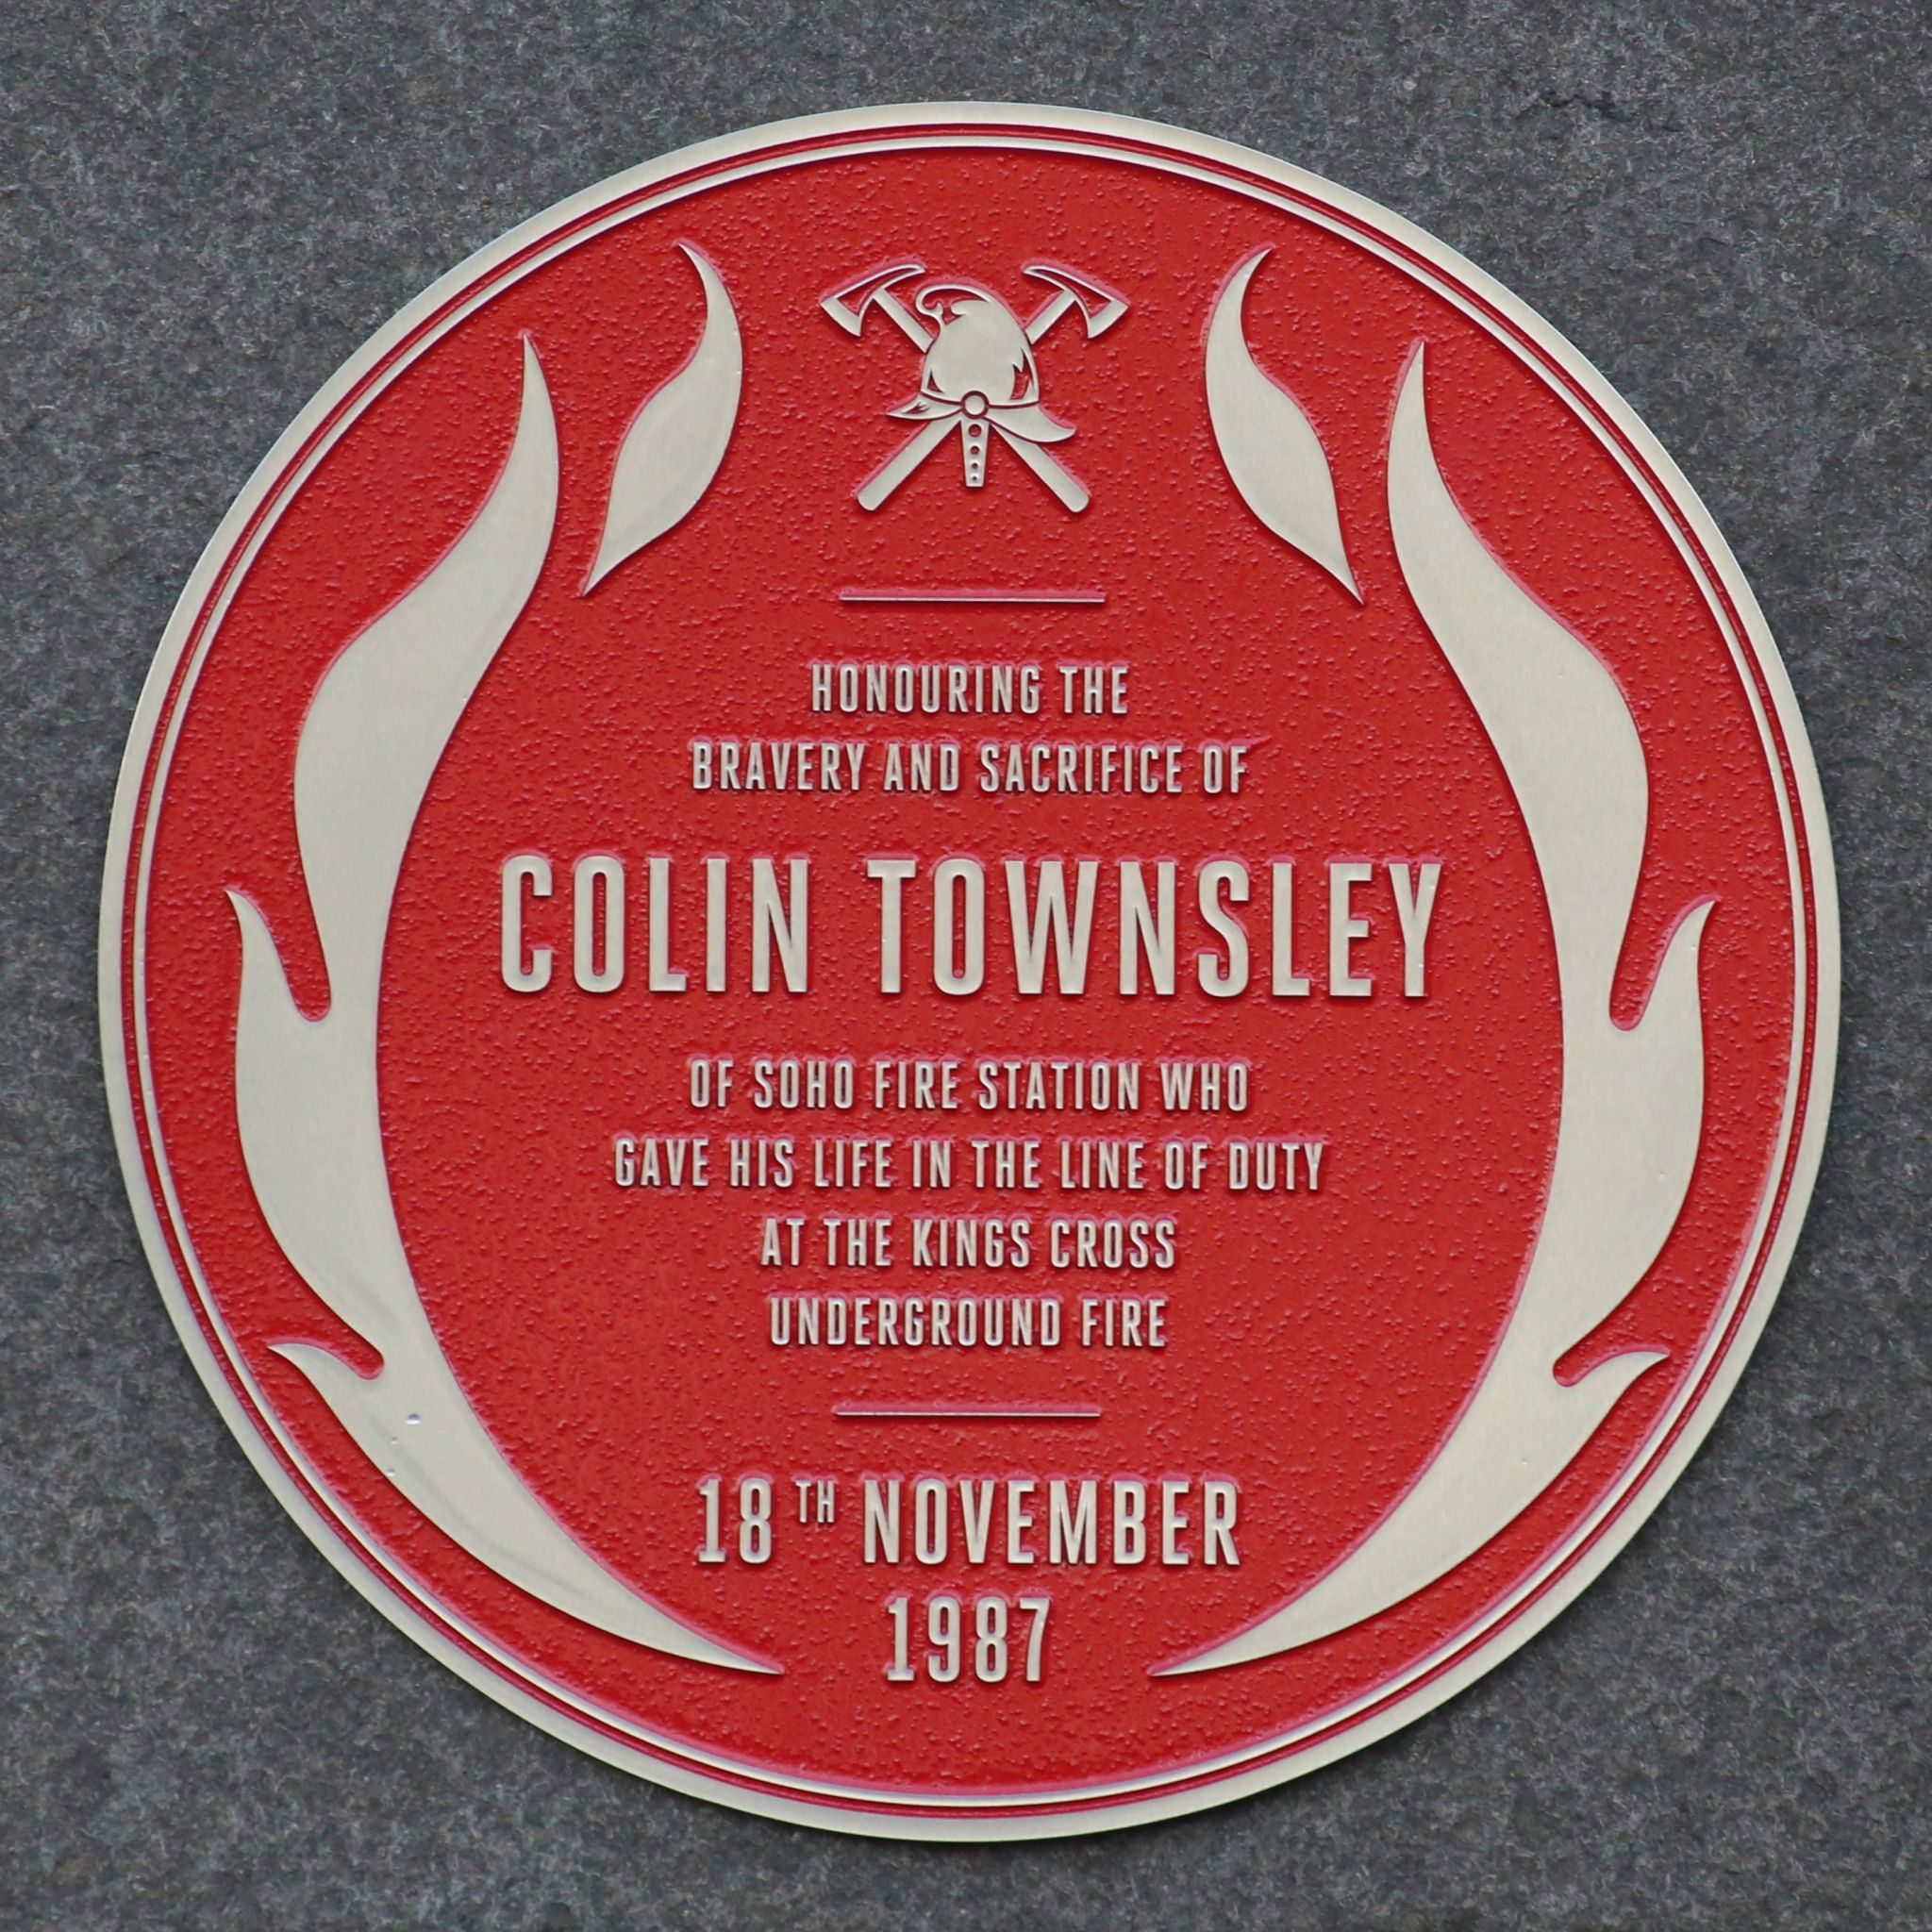 Station Officer Colin Townsley FBU Red Plaque 18-Nov-2021. London Fire Brigade Kings Cross fire.